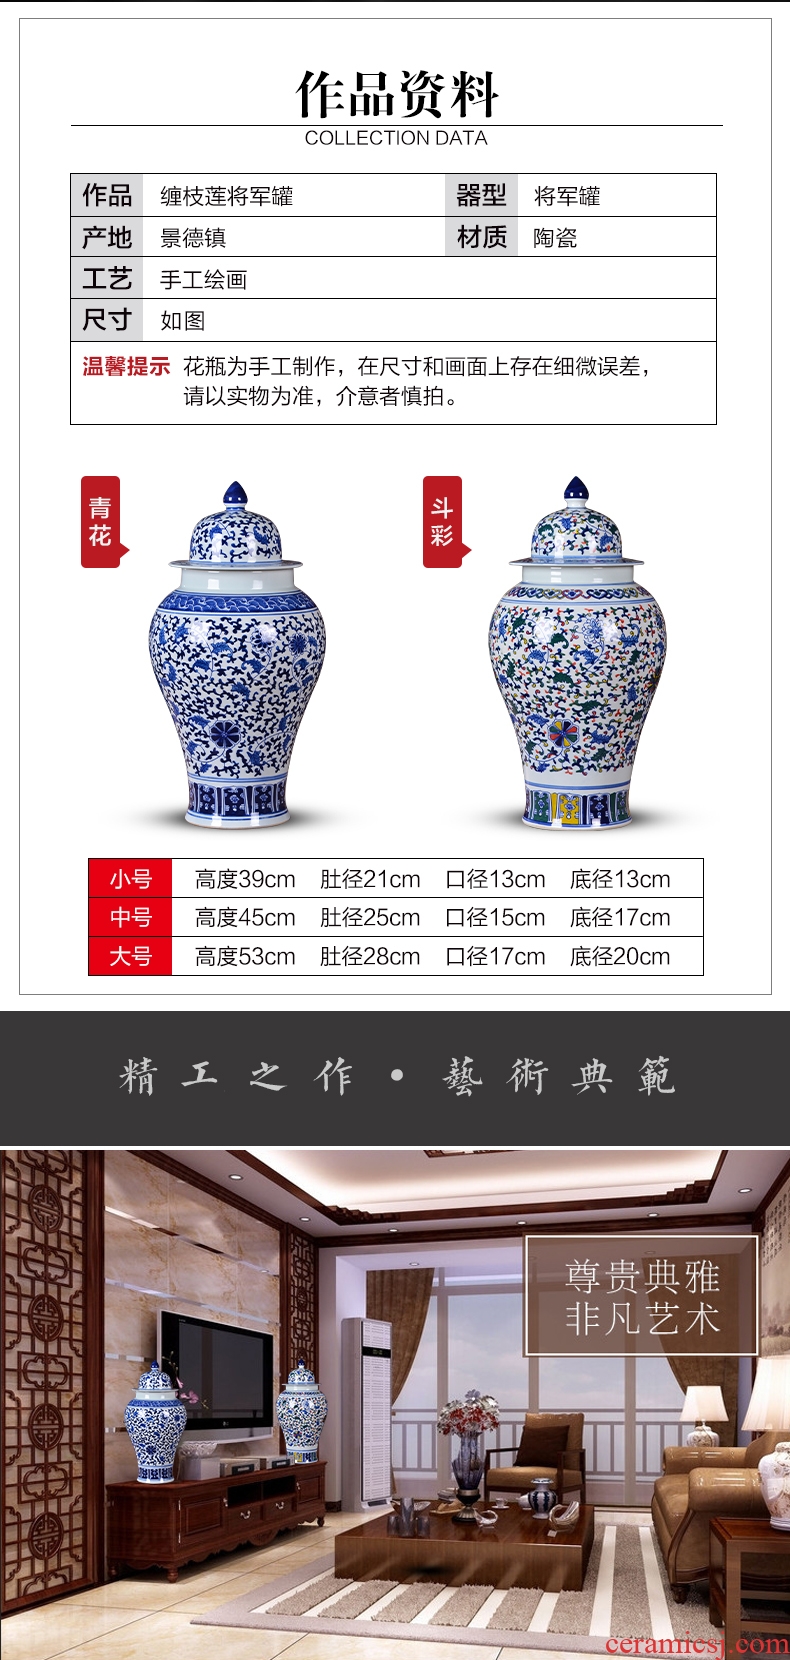 Quiver of jingdezhen ceramics vase painting and calligraphy calligraphy and painting scroll cylinder barrel landing a large sitting room household act the role ofing is tasted furnishing articles - 569203857099